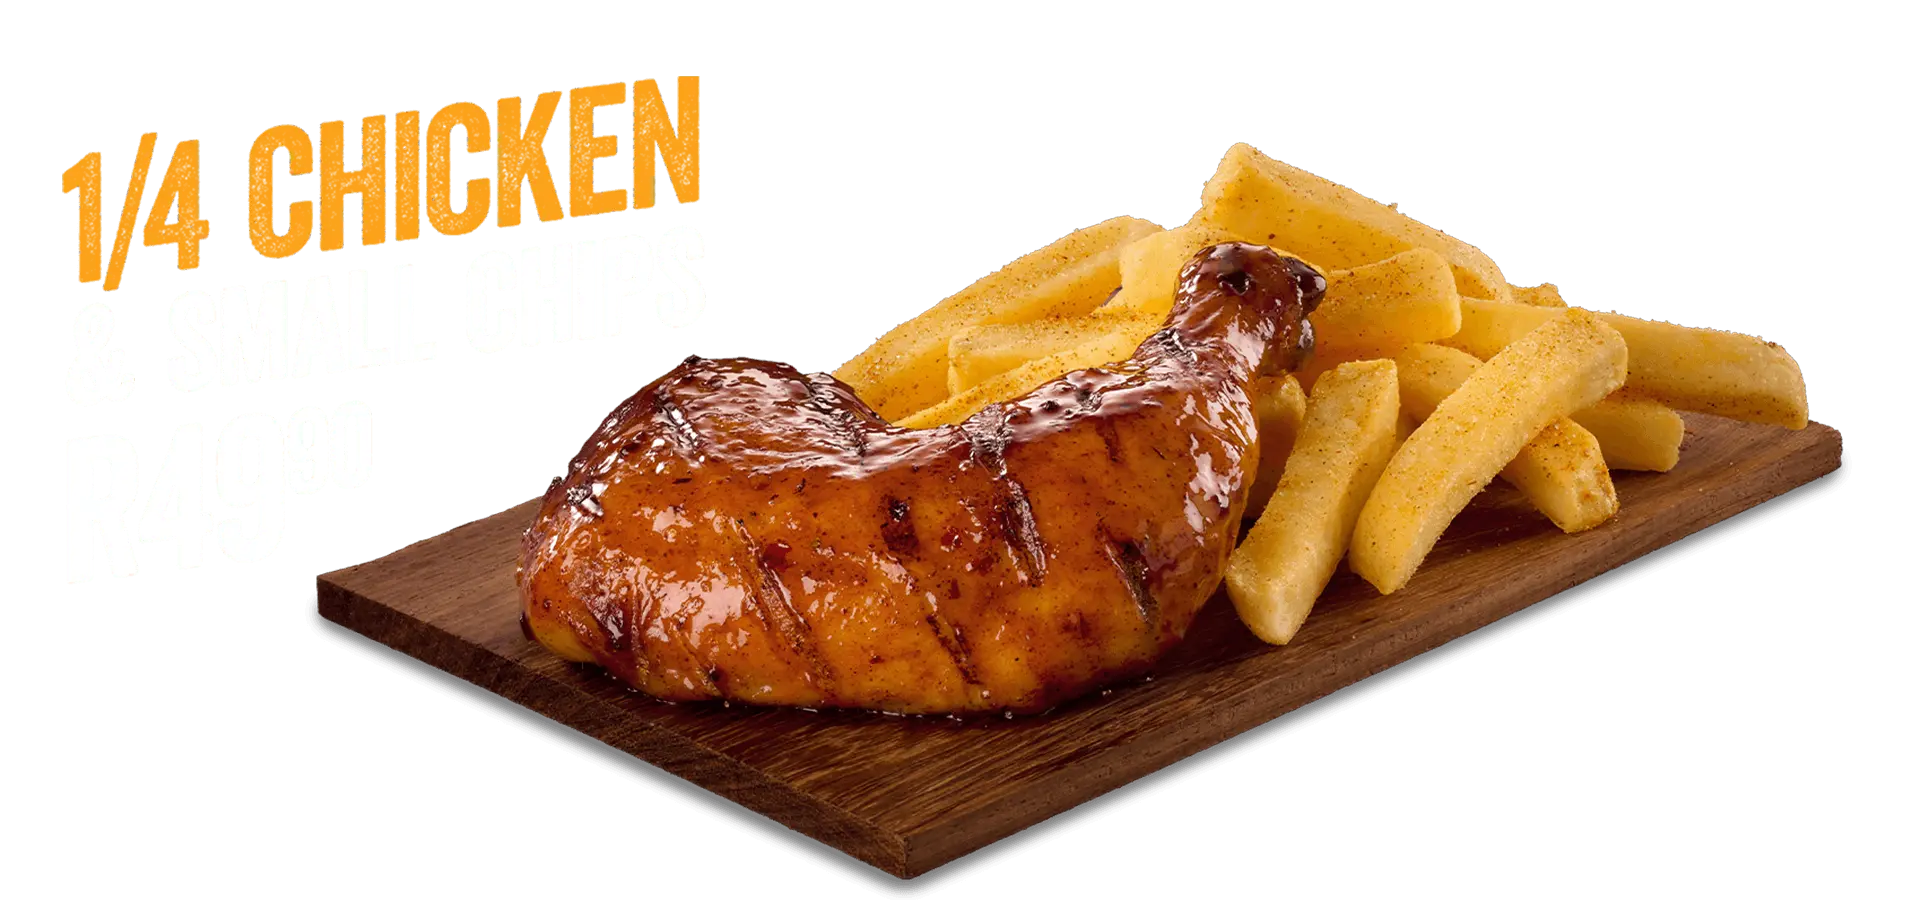 Steers® ¼ Chicken and chips on a wooden board placed on grey surface with a purple background. 